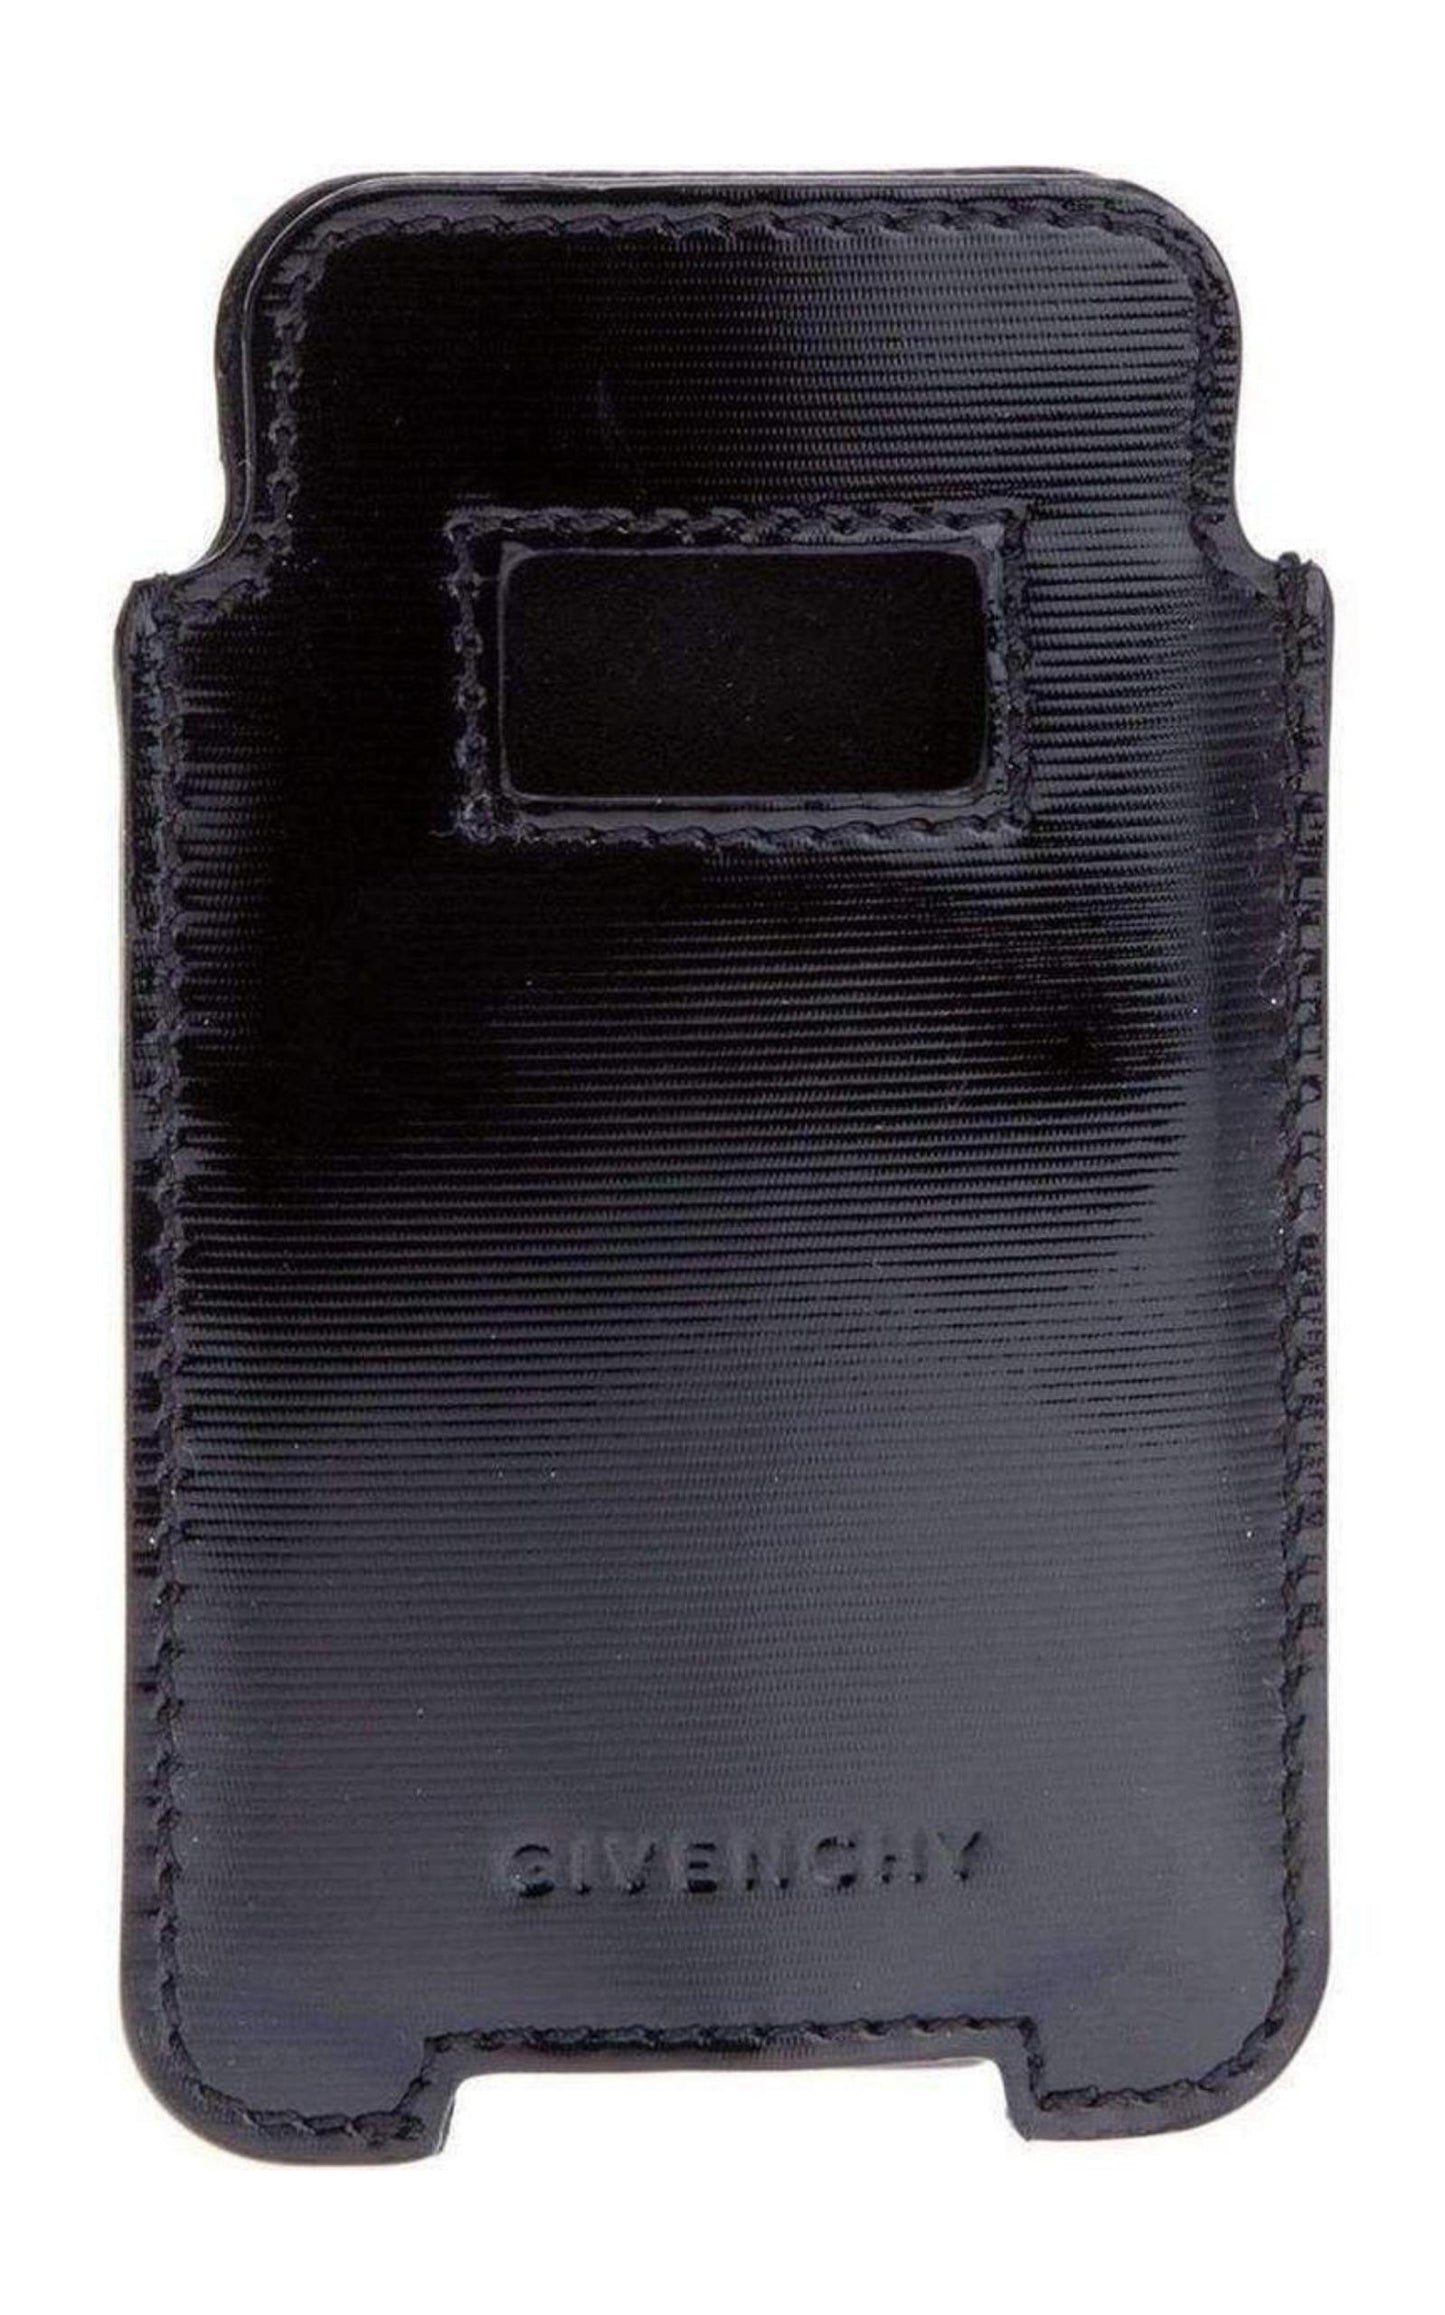 Givenchy Black Textured Leather Phone or Credit Card Case